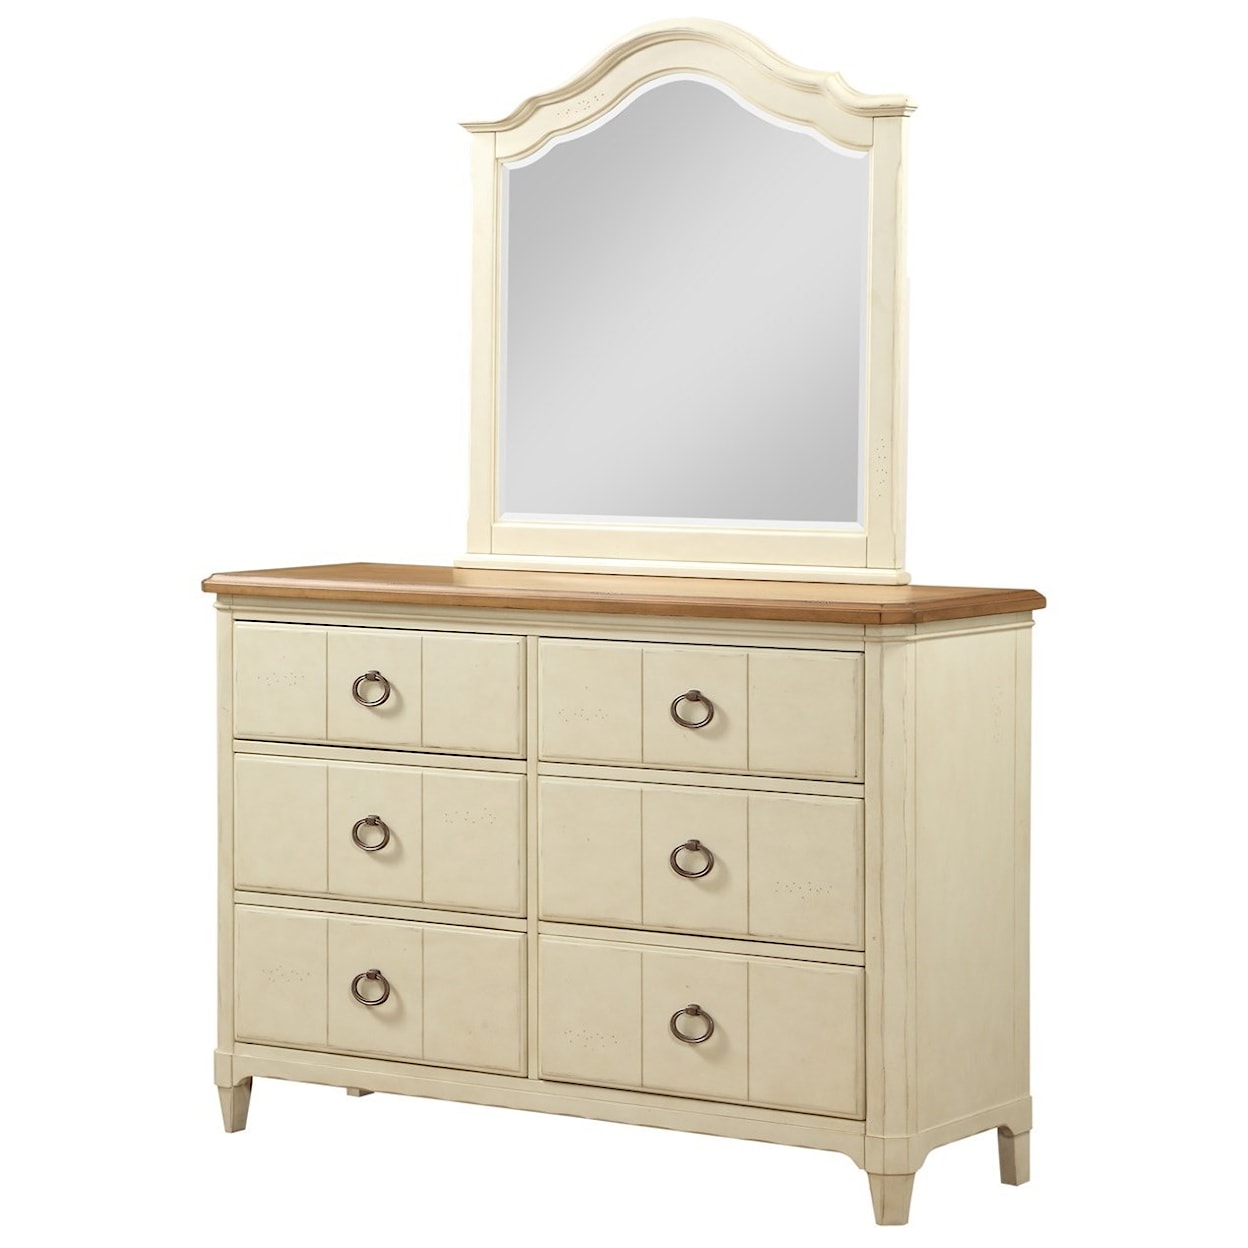 Panama Jack by Palmetto Home Millbrook Dresser and Mirror Set